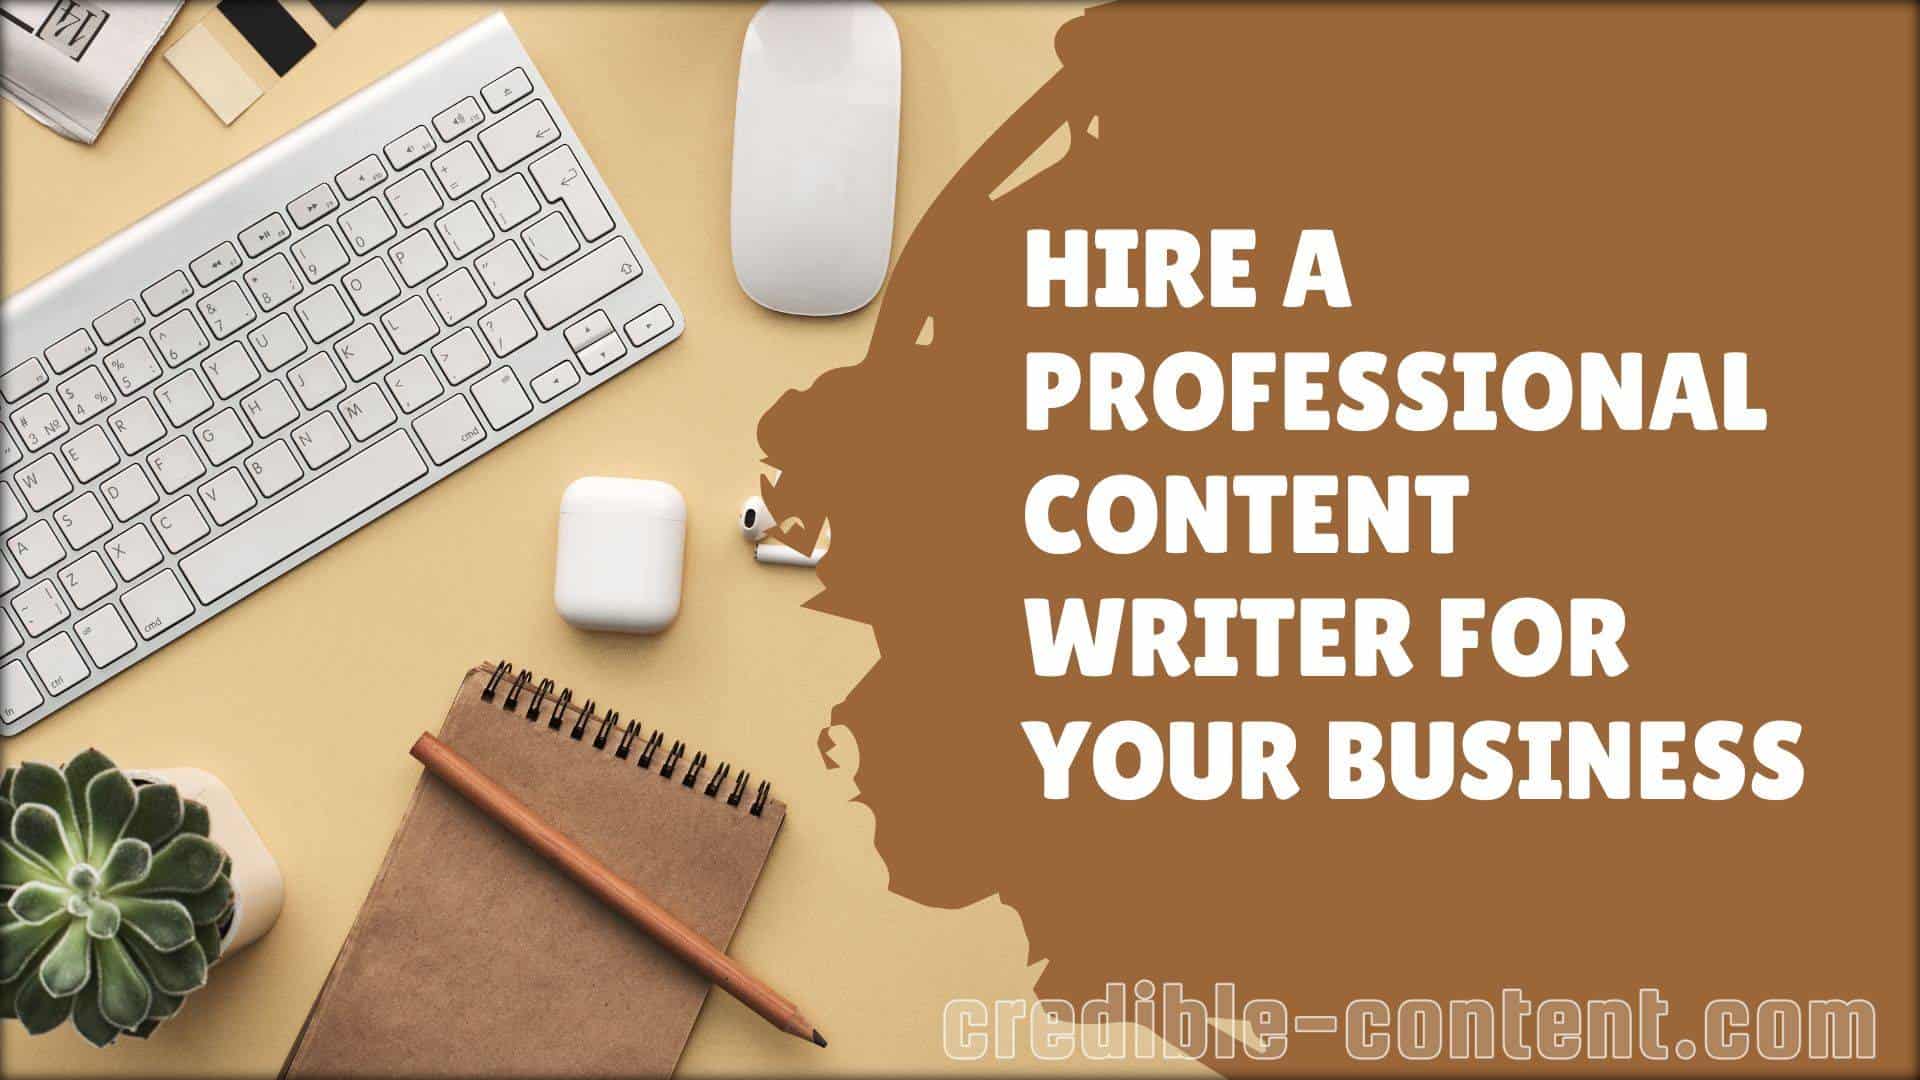 Hire a professional content writer for your business